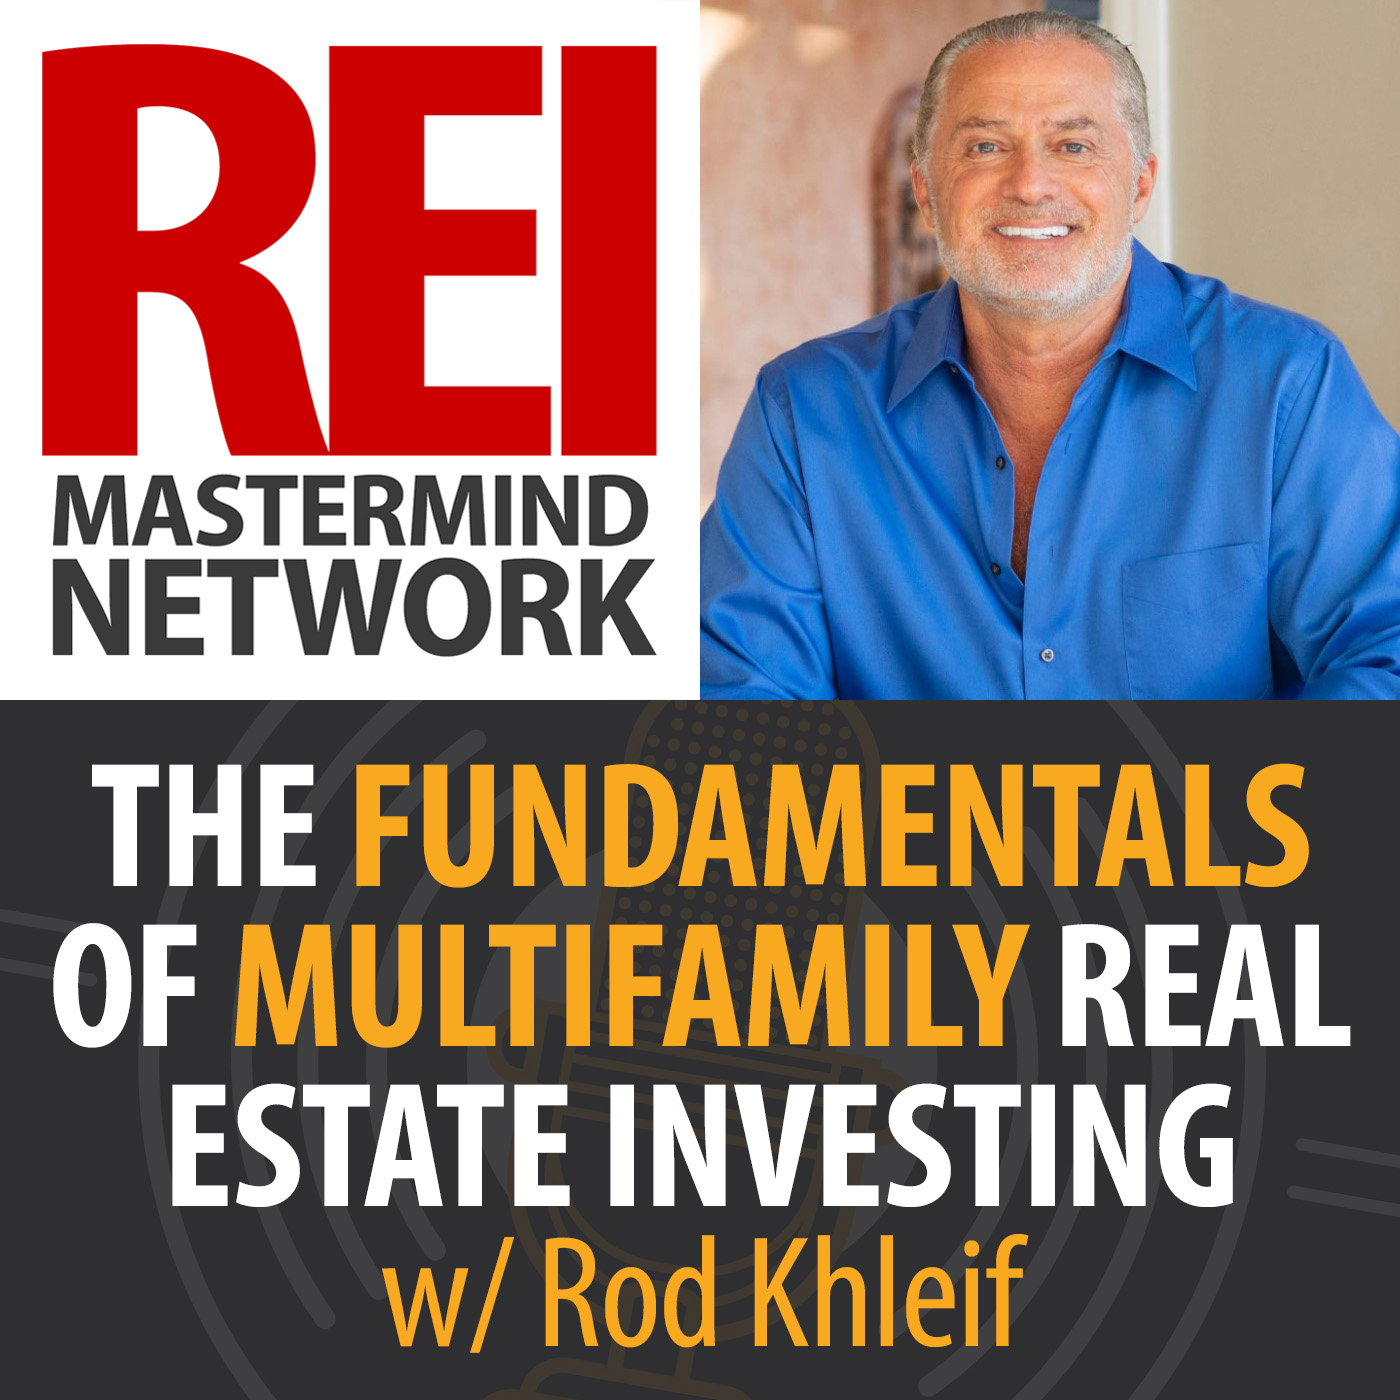 The Fundamentals of Multifamily Real Estate Investing with Rod Khleif Image